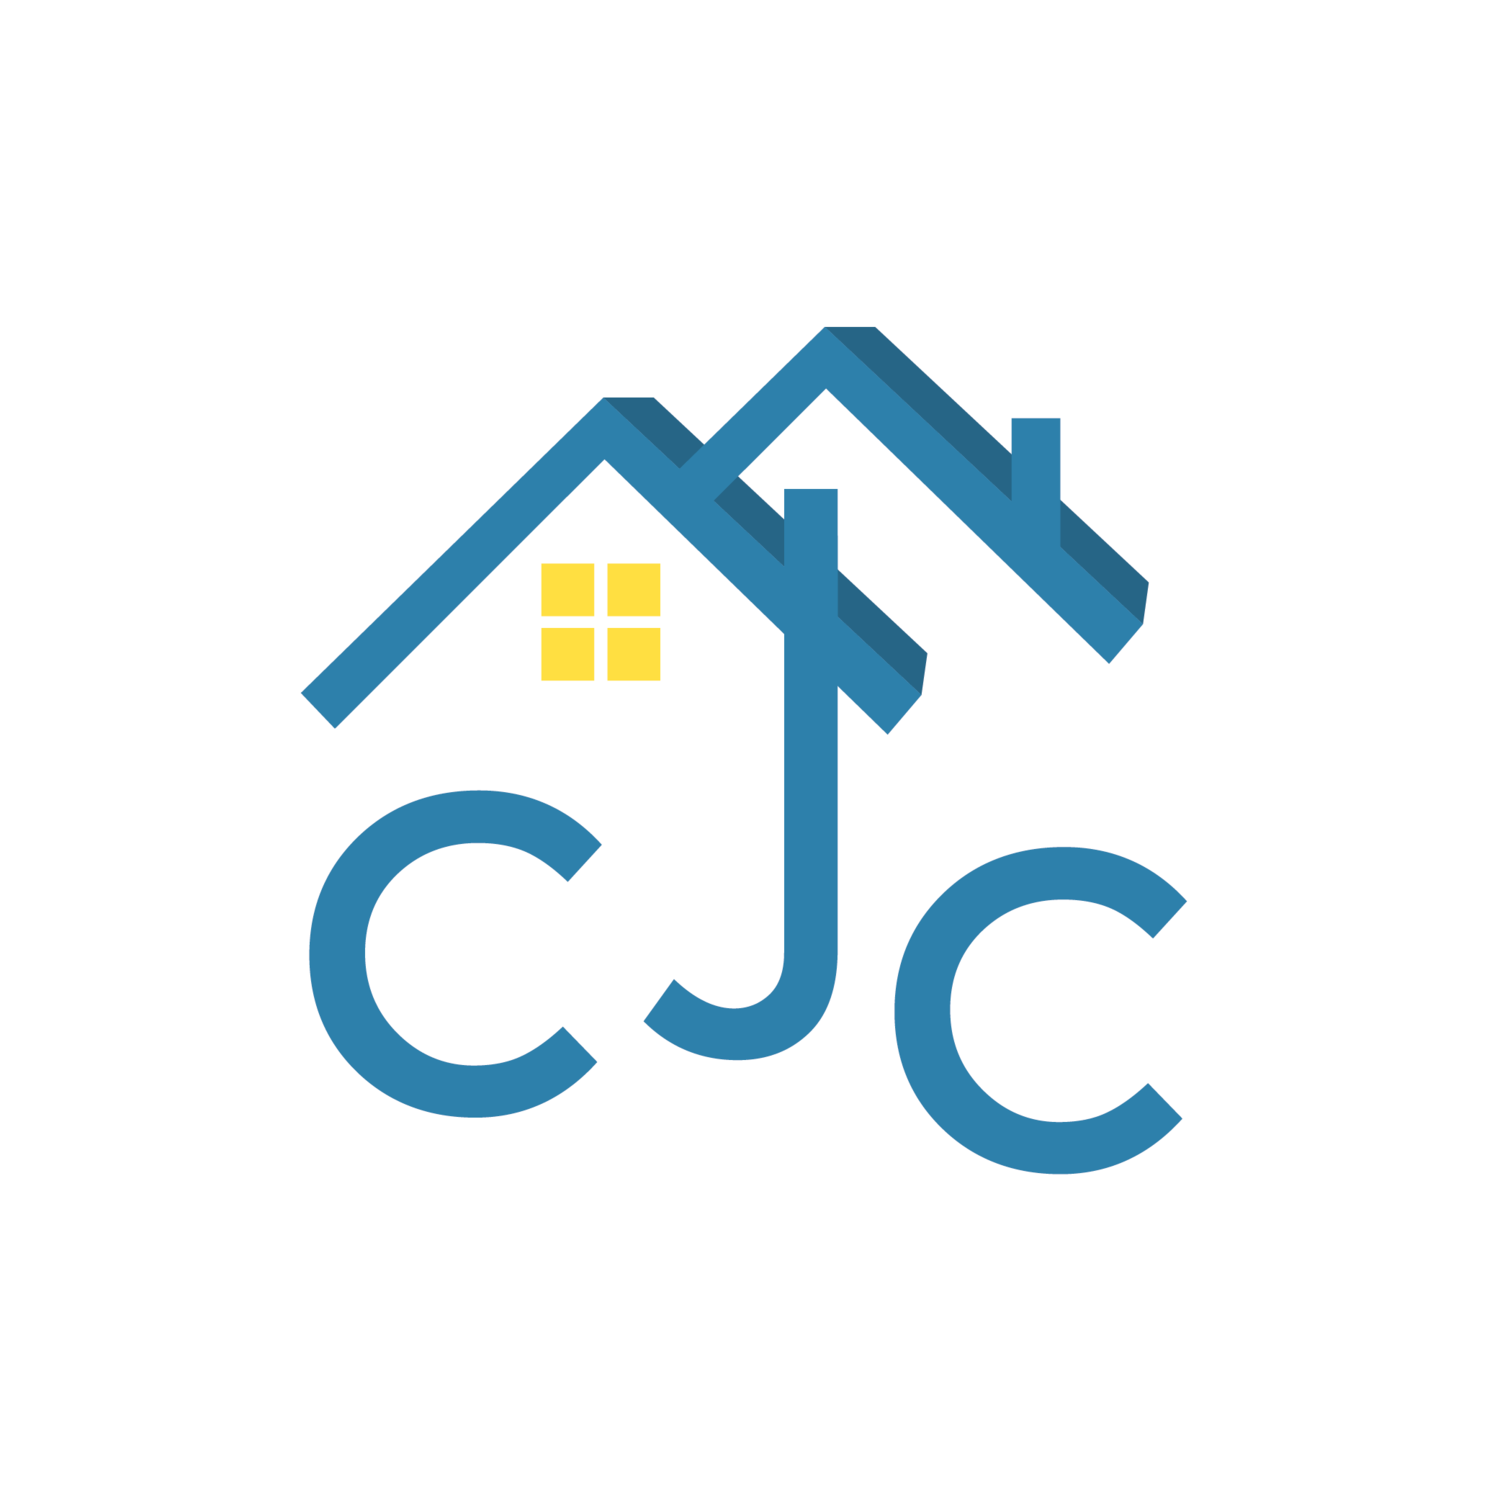 CJC Roofing & Building